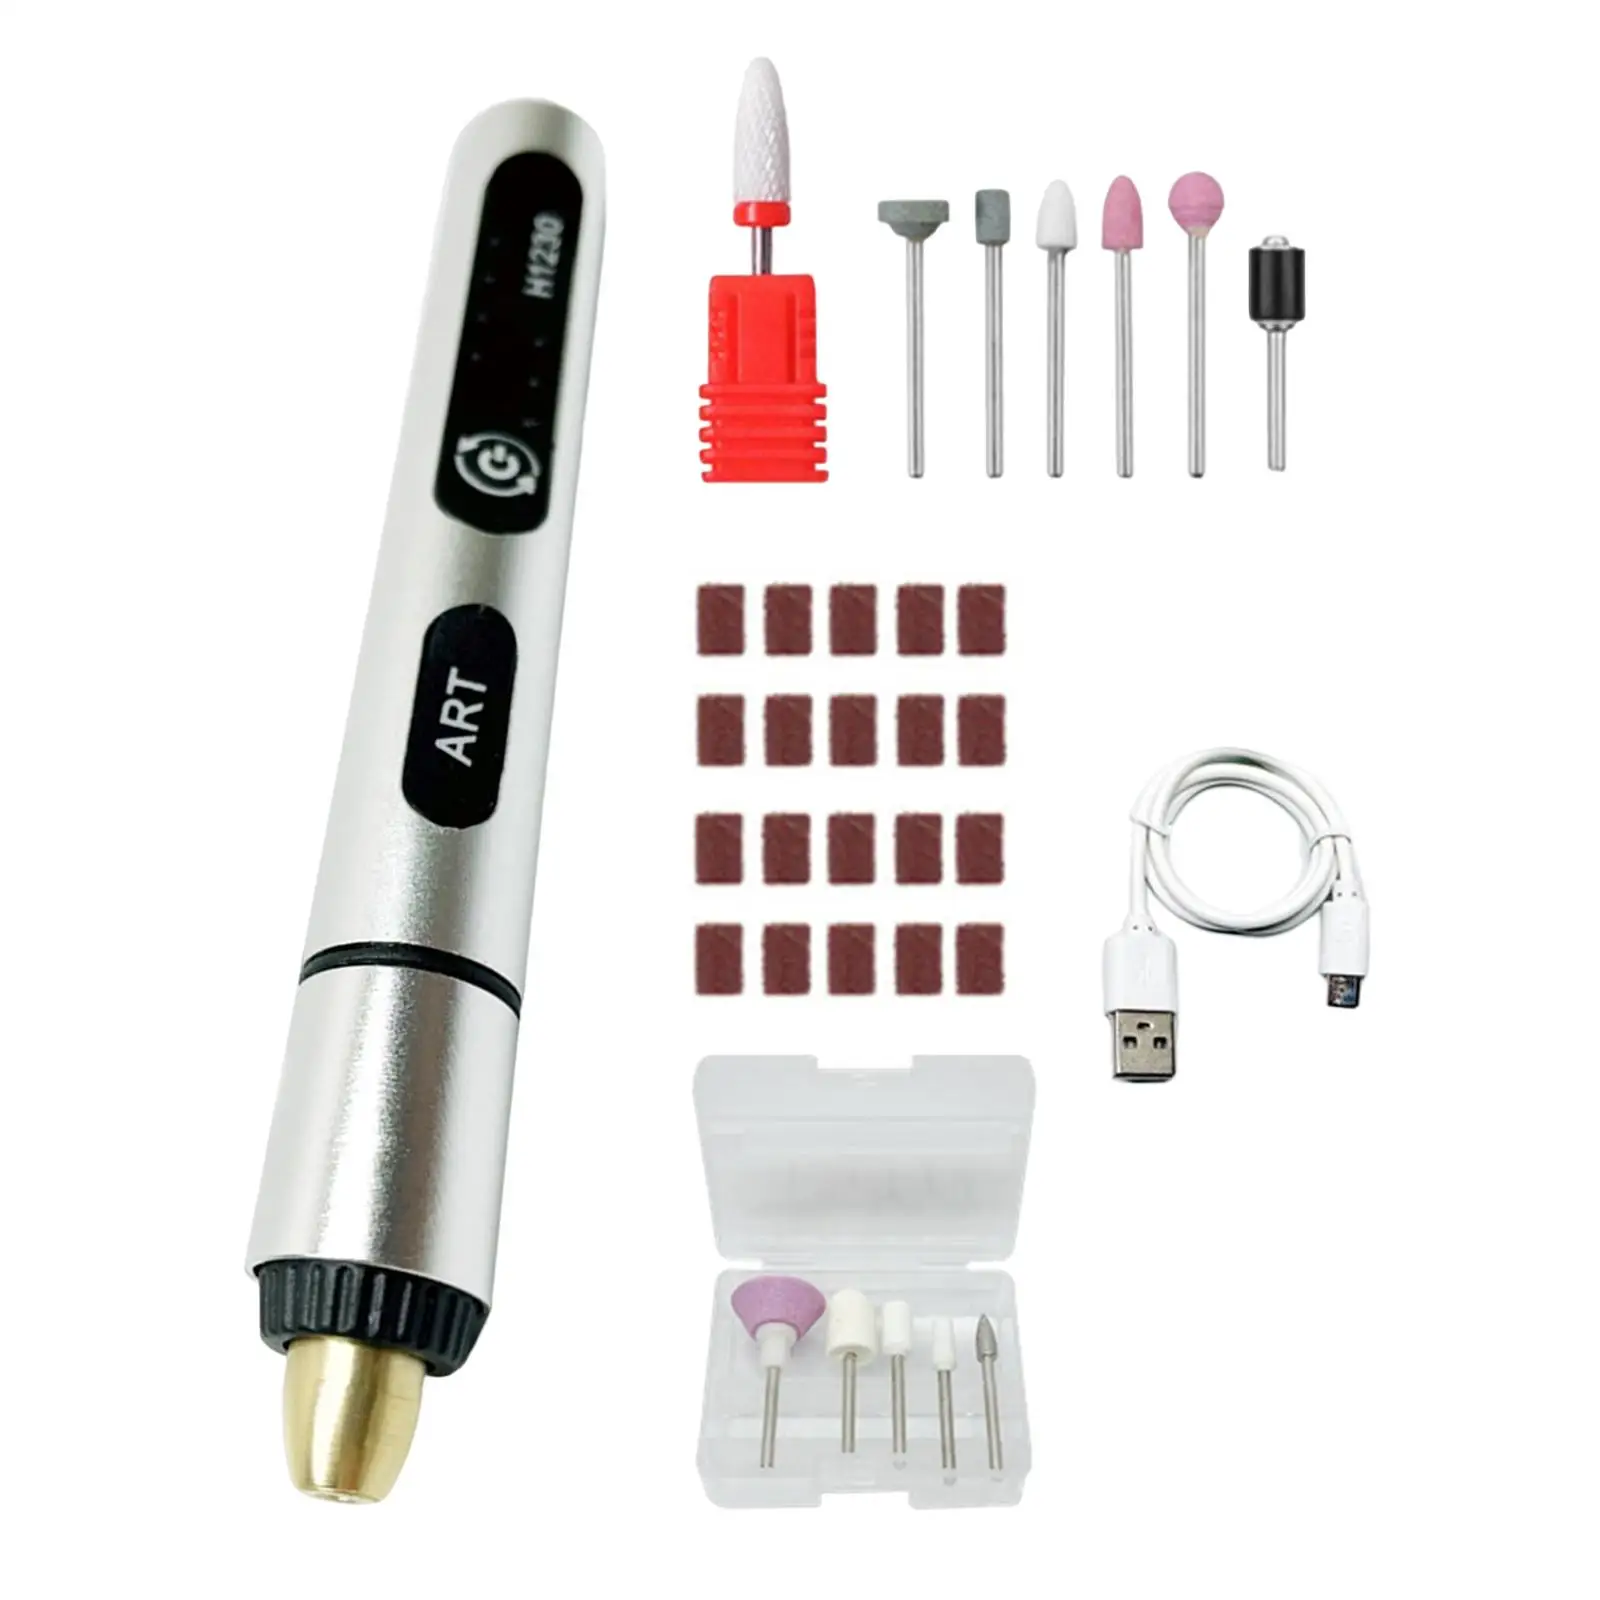 Multifunction Electric Nail Drills Kit USB Charging for Crafting Projects